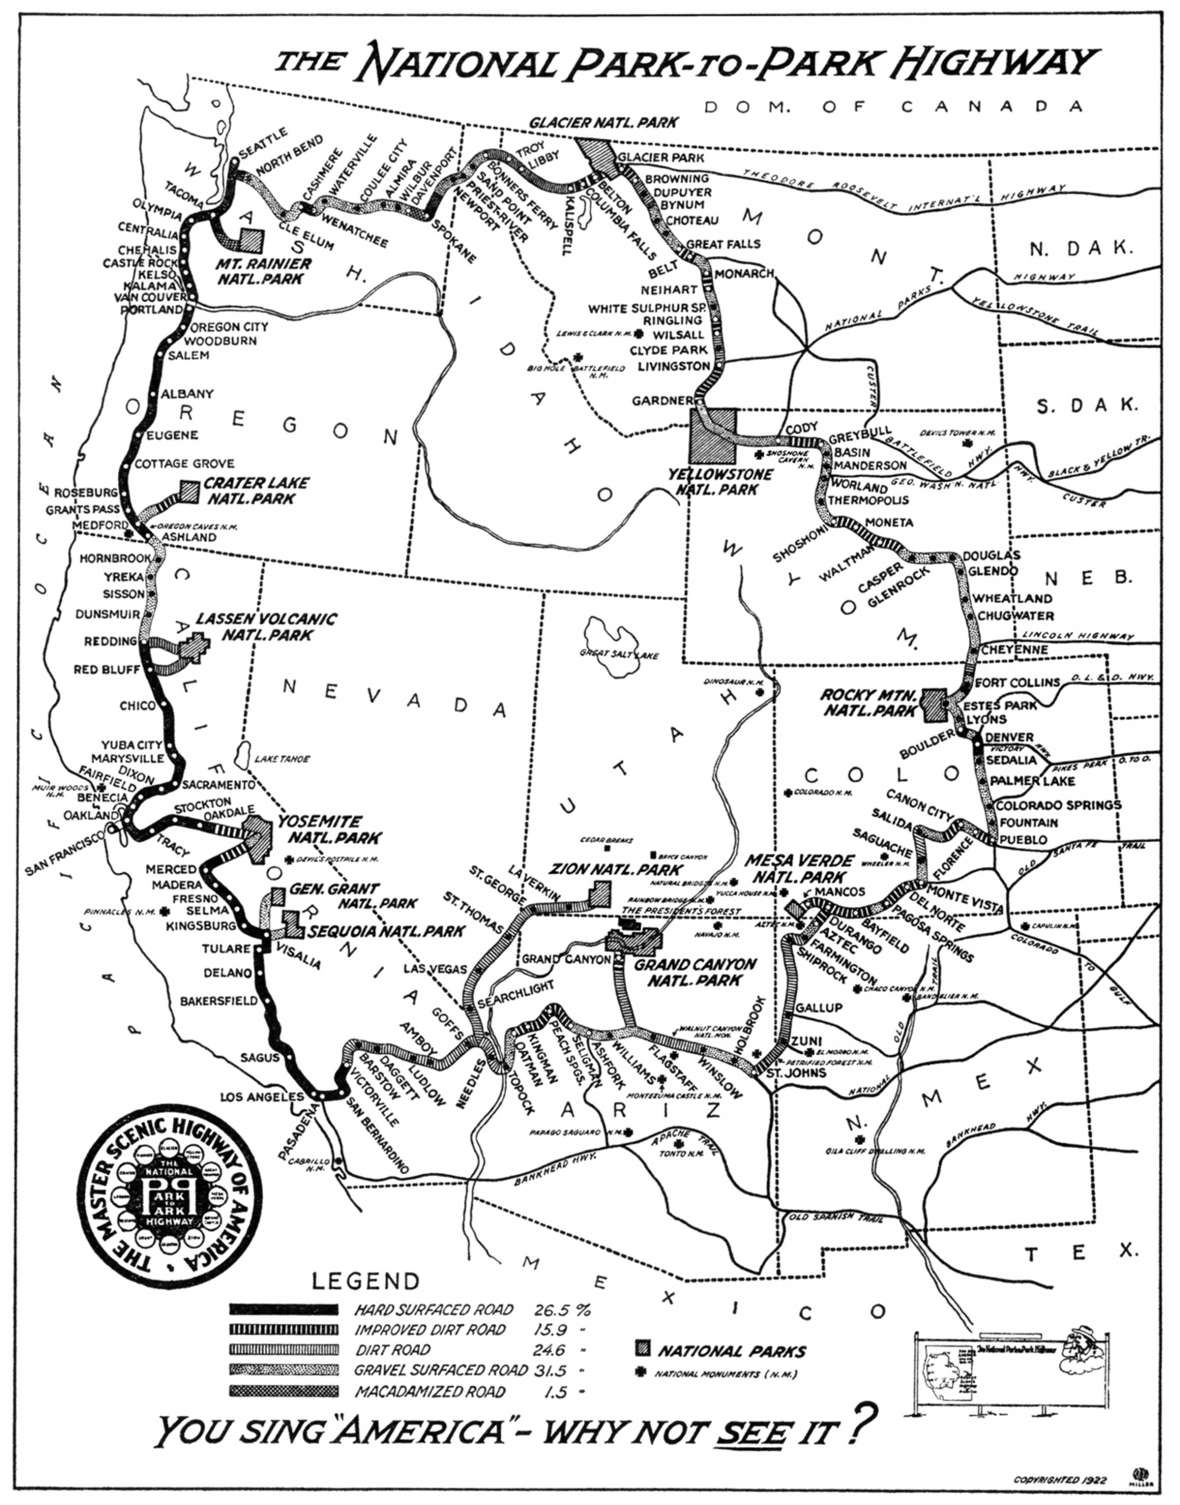 Departing Aug. 26, 1920, a party of twelve motorists formally inaugurated the National Park-to-Park Highway with a 76-day tour starting with the Denver-to-Yellowstone trek through Wyoming. This map was published in 1922. Amercianroads.us.